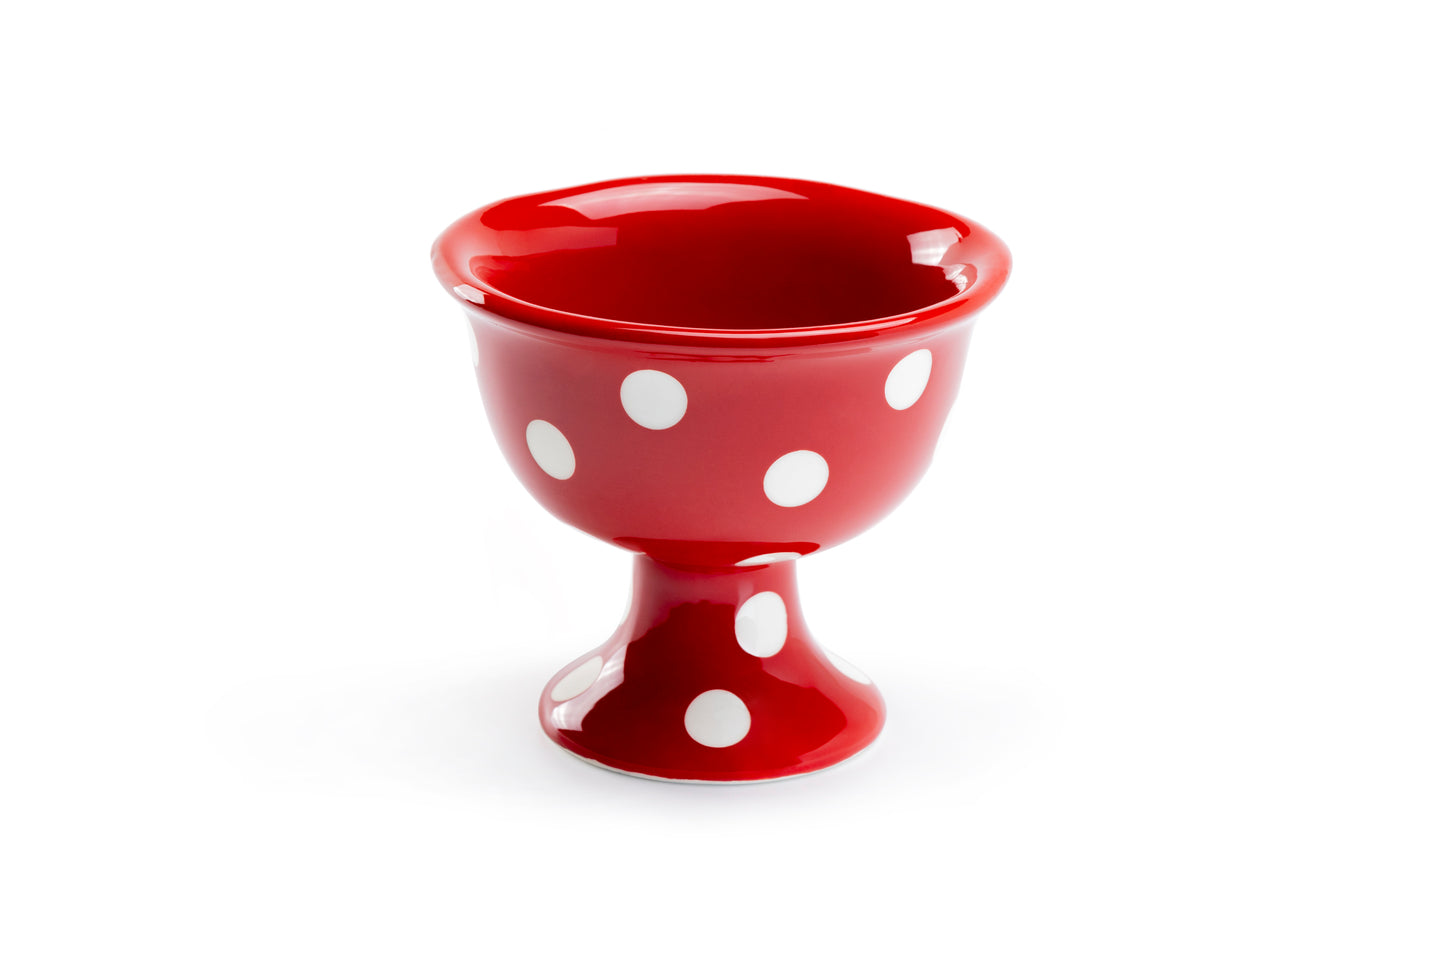 Terramoto Ceramic Polka Dots American Red Footed Ice Cream Bowl